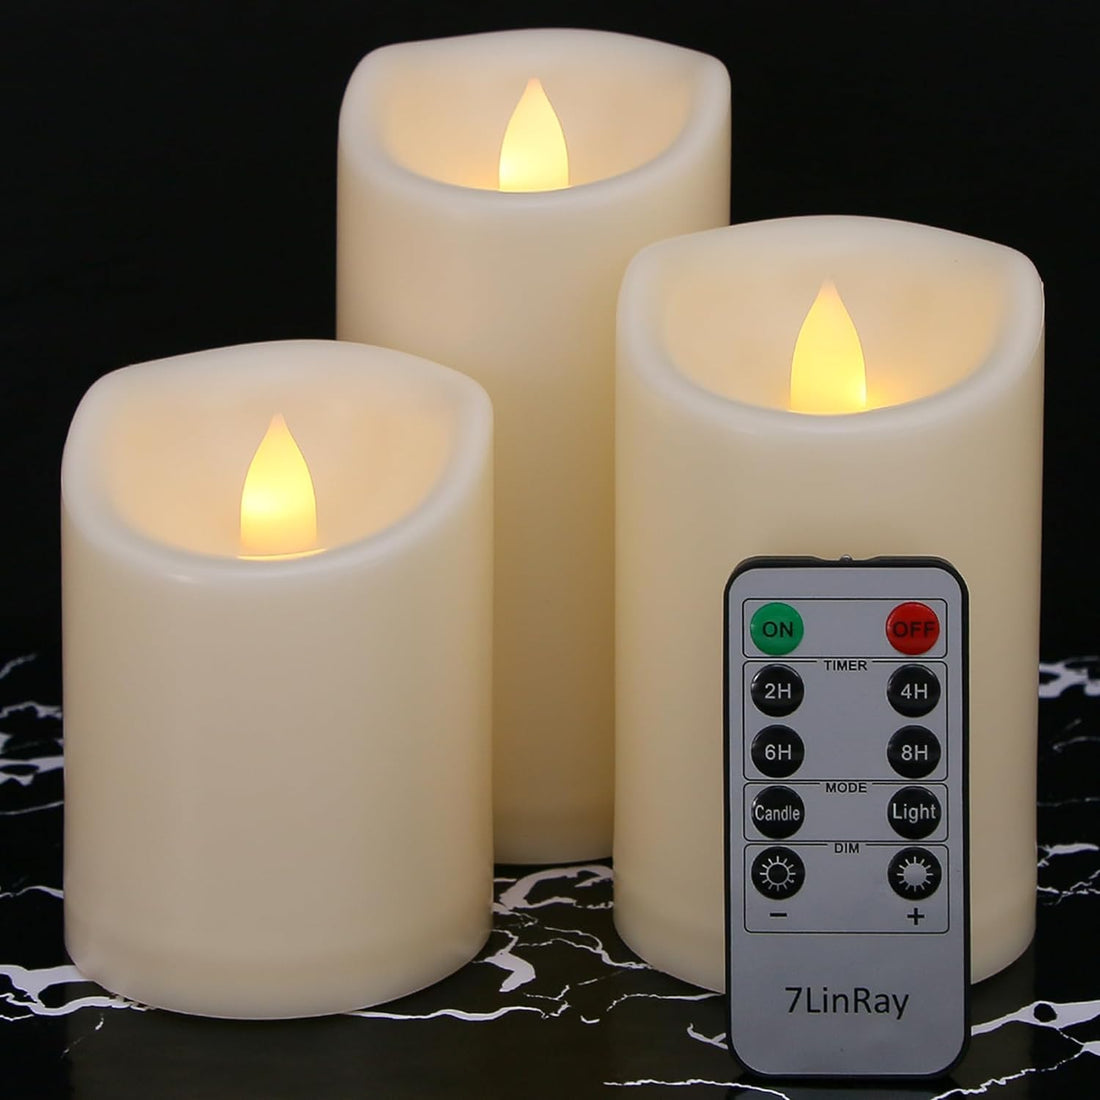 AONELAS 7LinRay Flameless Flickering Candles with Remote and Timers, 1000 Hours Waterproof Ourdoor Indoor Battery Operated LED Pillar Candles, Ivory Plastic, Set of 3(D 3" x H 4" 5" 6")